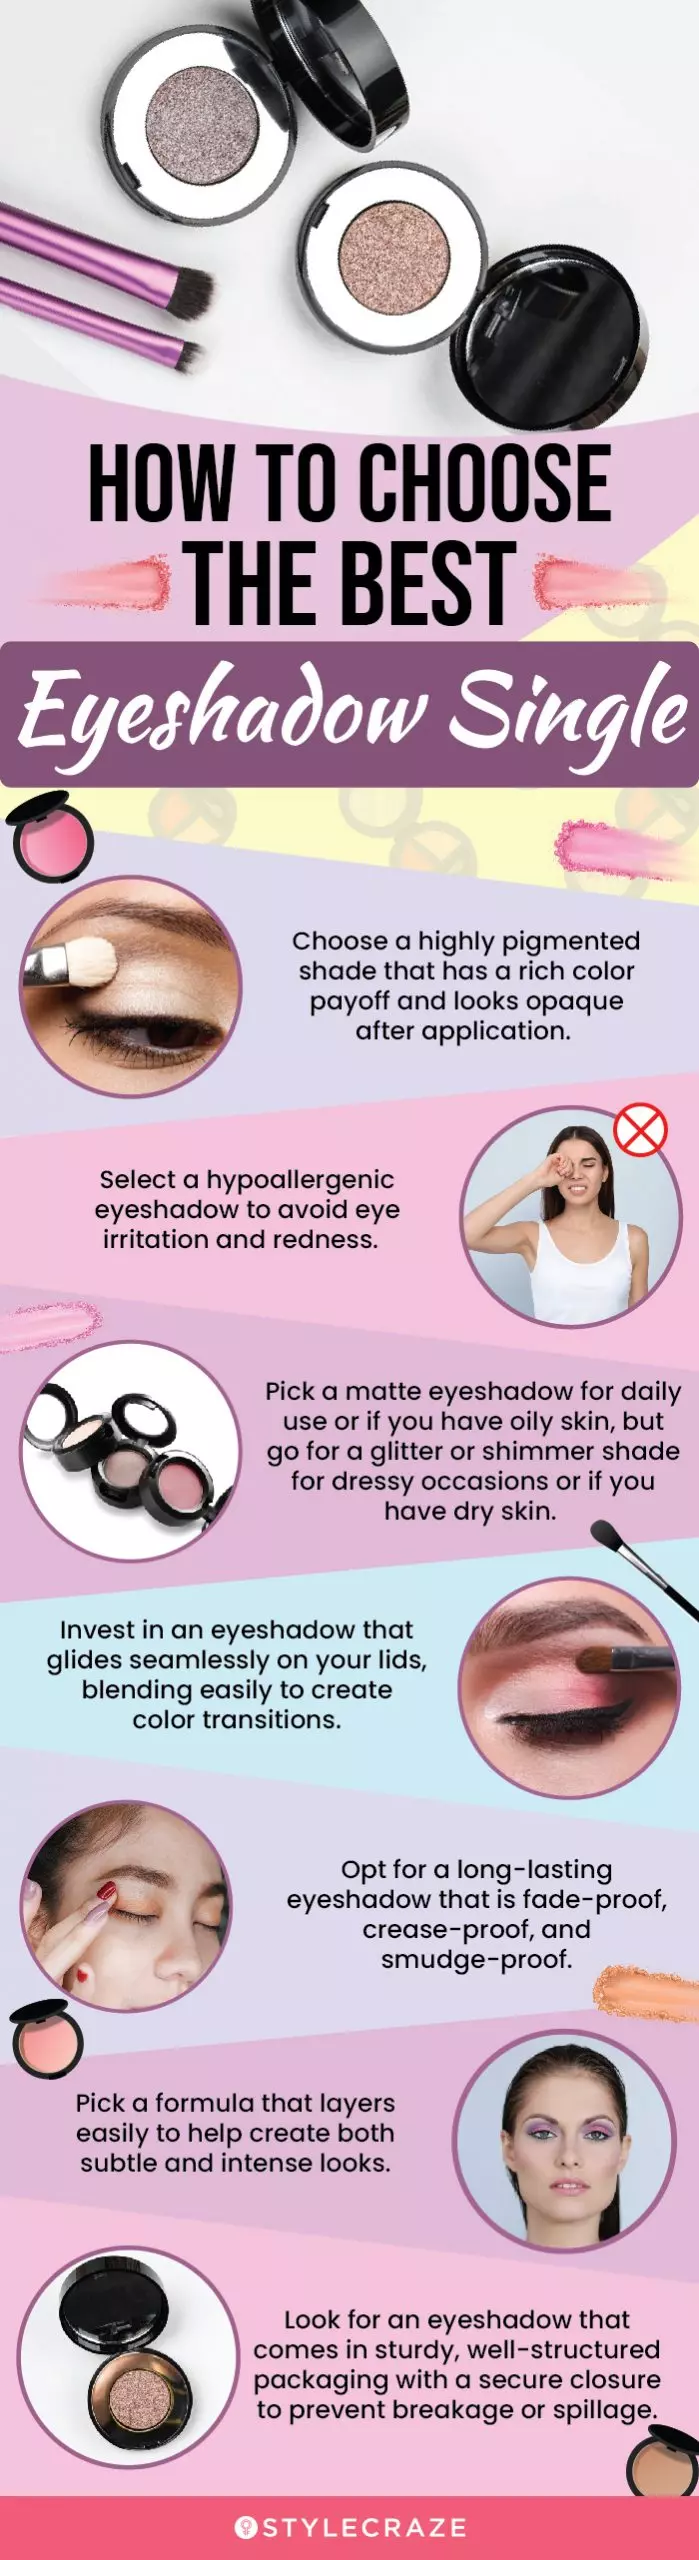 How To Choose The Best Eyeshadow Single (infographic)